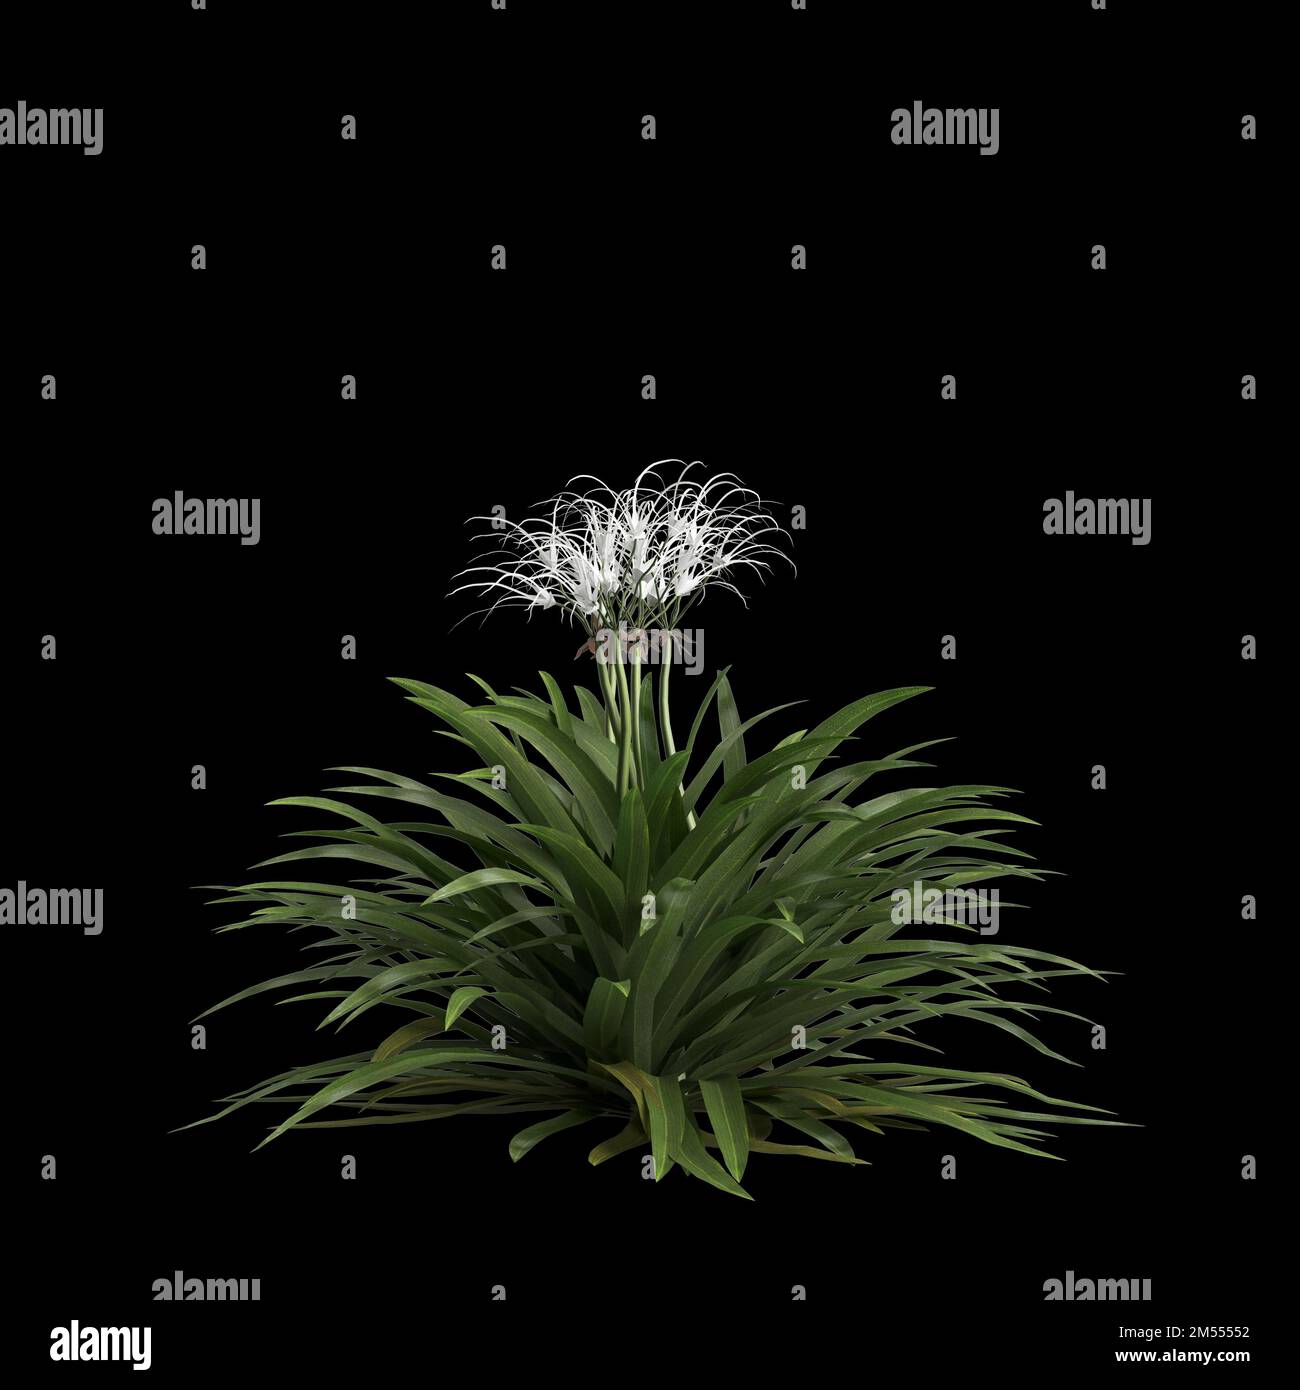 3d illustration of spider lily isolated on black background Stock Photo